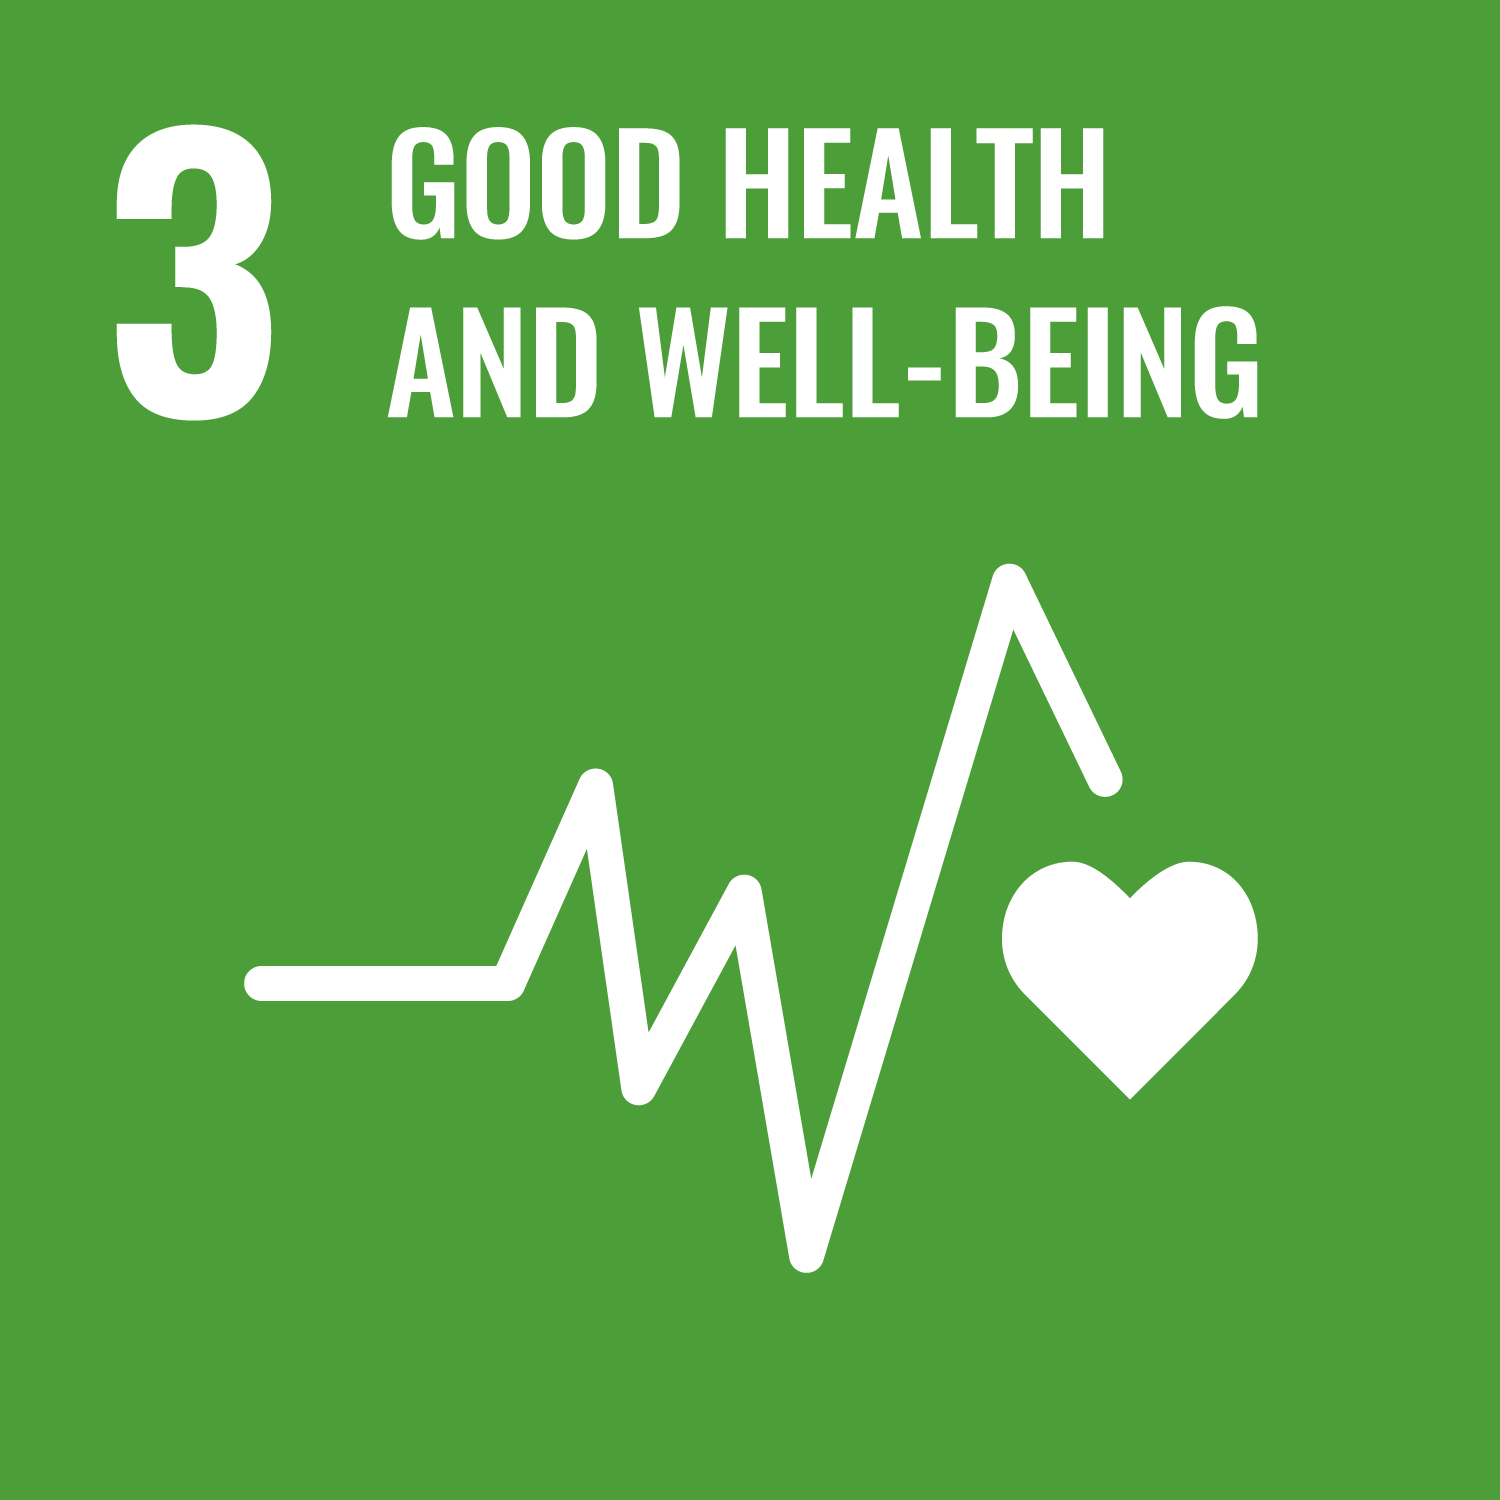 3. Good health and well being